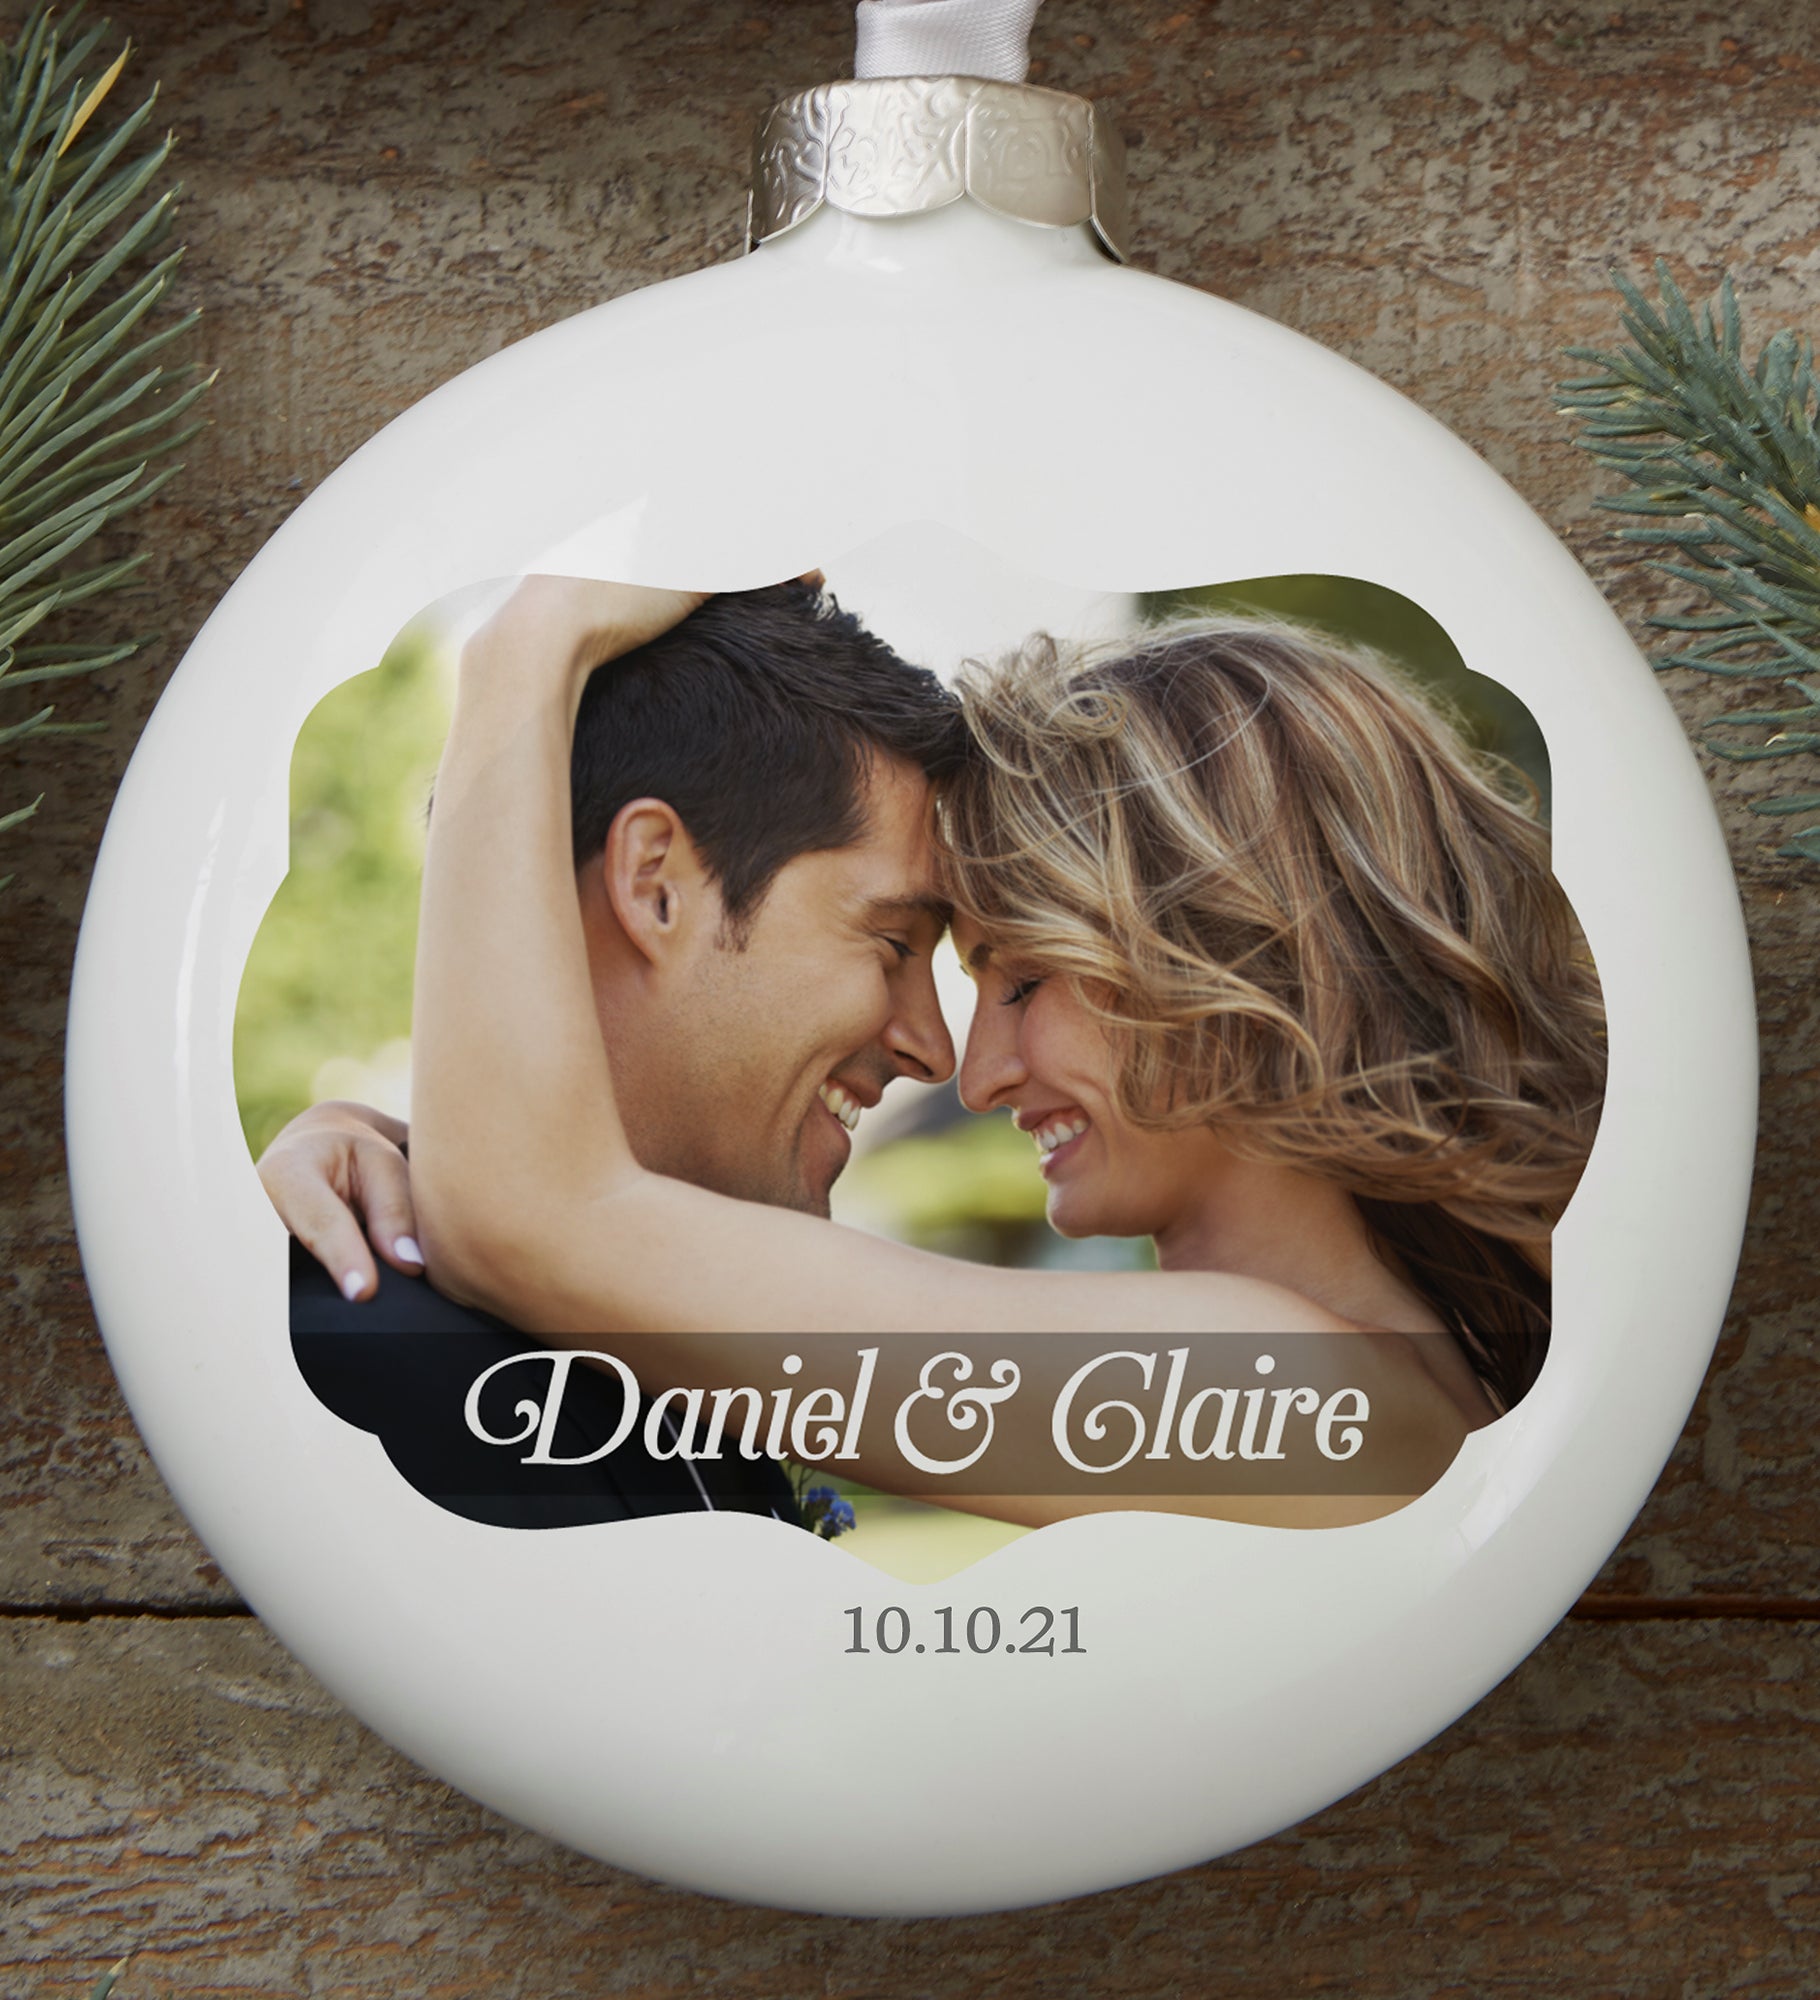 Wedding Day Photo Personalized Deluxe Globe Ornament